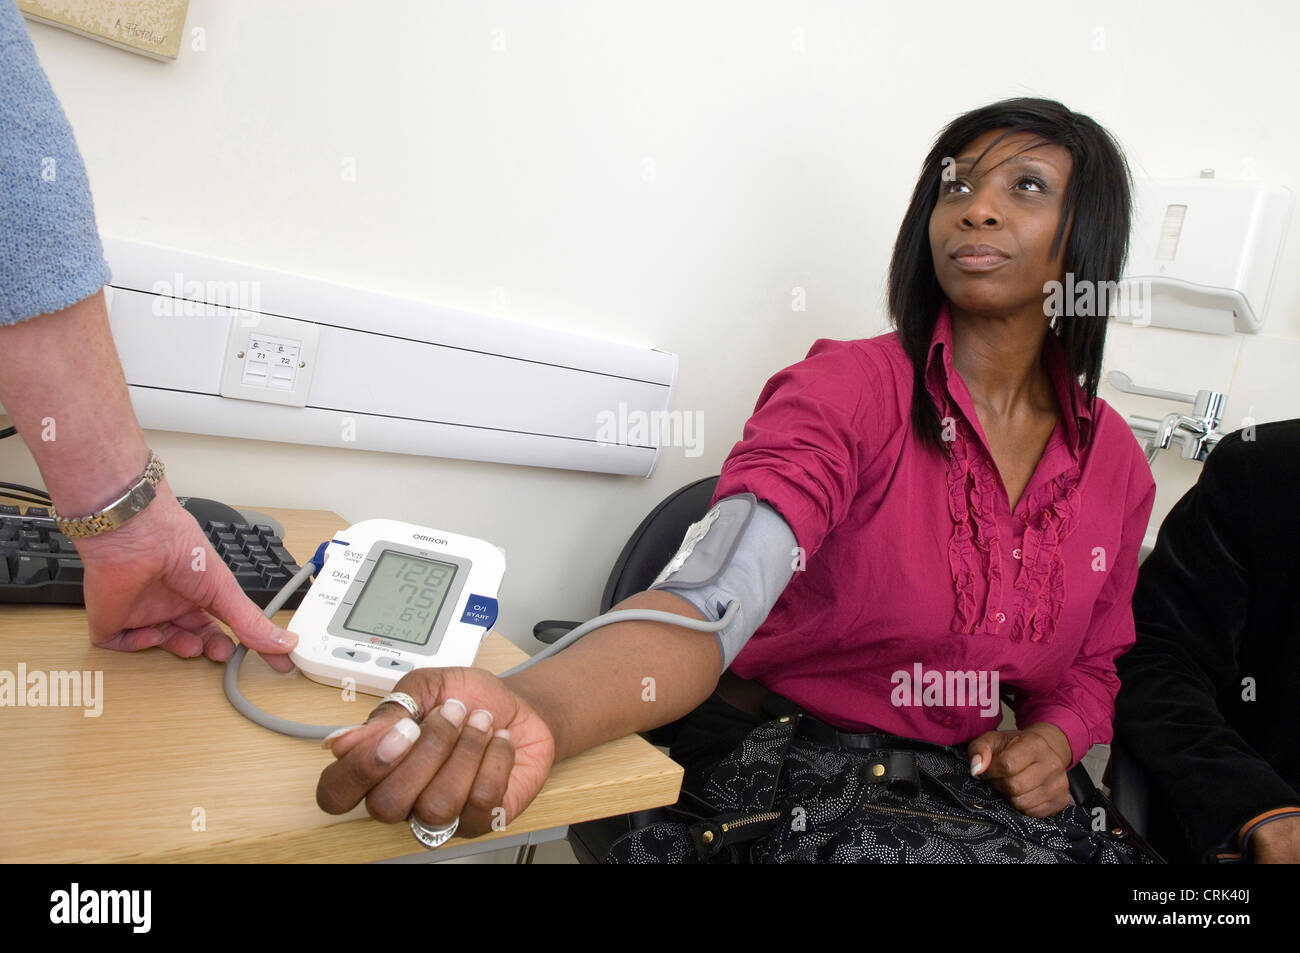 Blood pressure and other basic health checks are carried out before any treatment involved in IVF can begin. Stock Photo